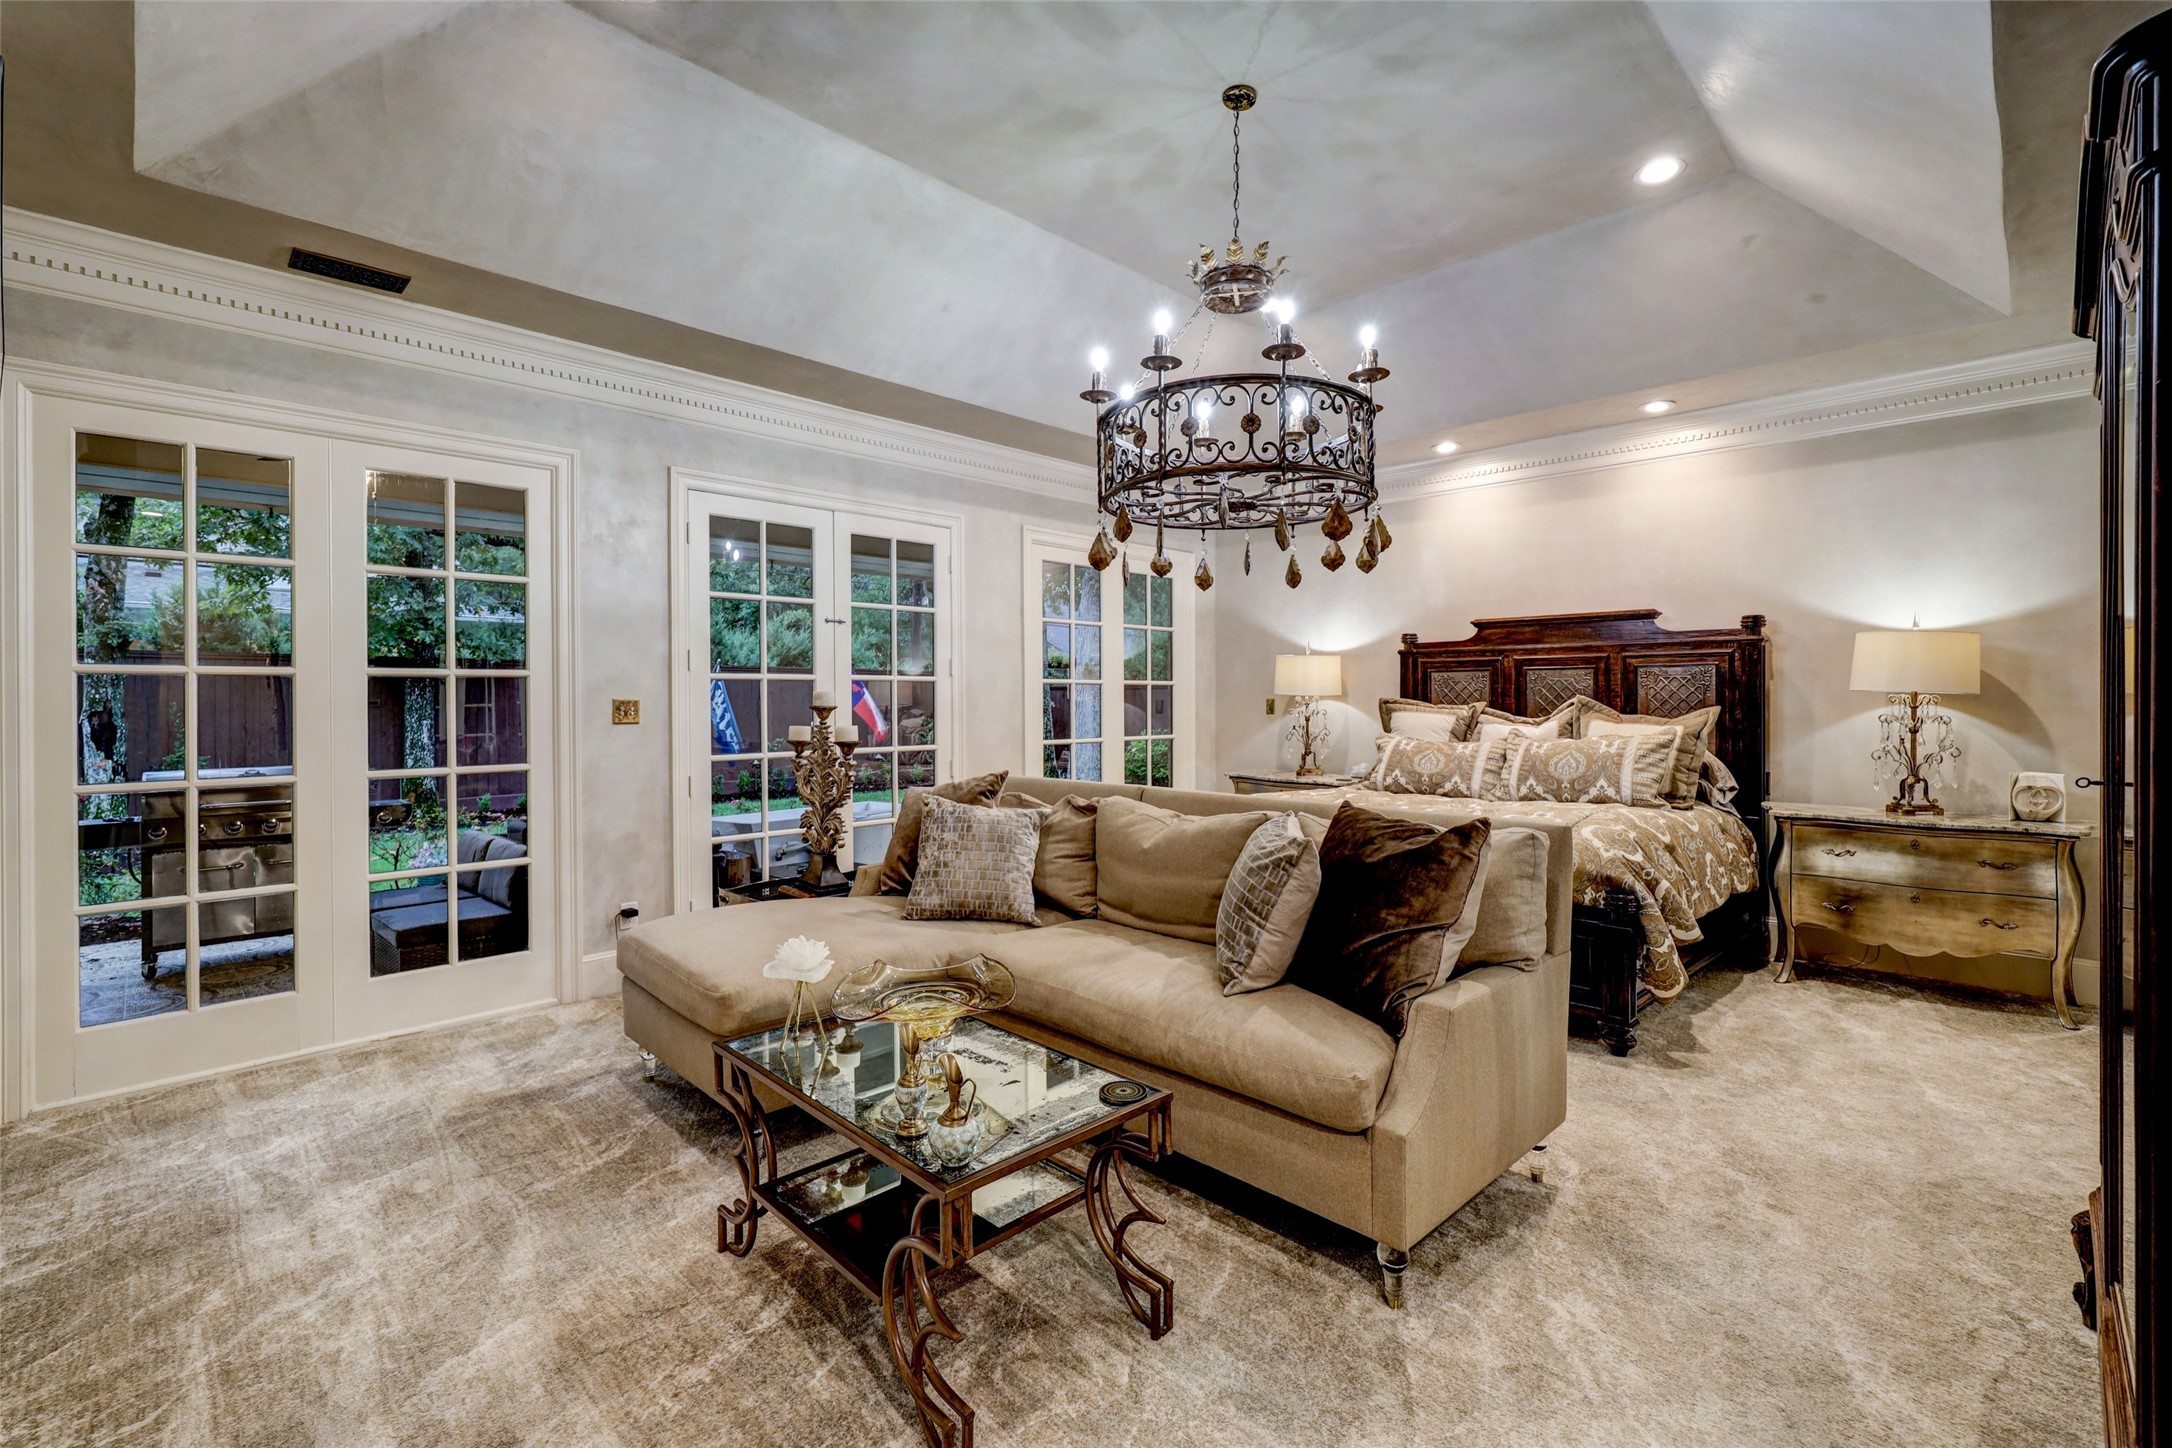 Ravishing and cloistered is the über serene and luxurious Master Suite. Walls are swathed with Diamond Brite custom plaster, as is the vaulted ceiling above. Access to the Pool is through a set of French Doors.